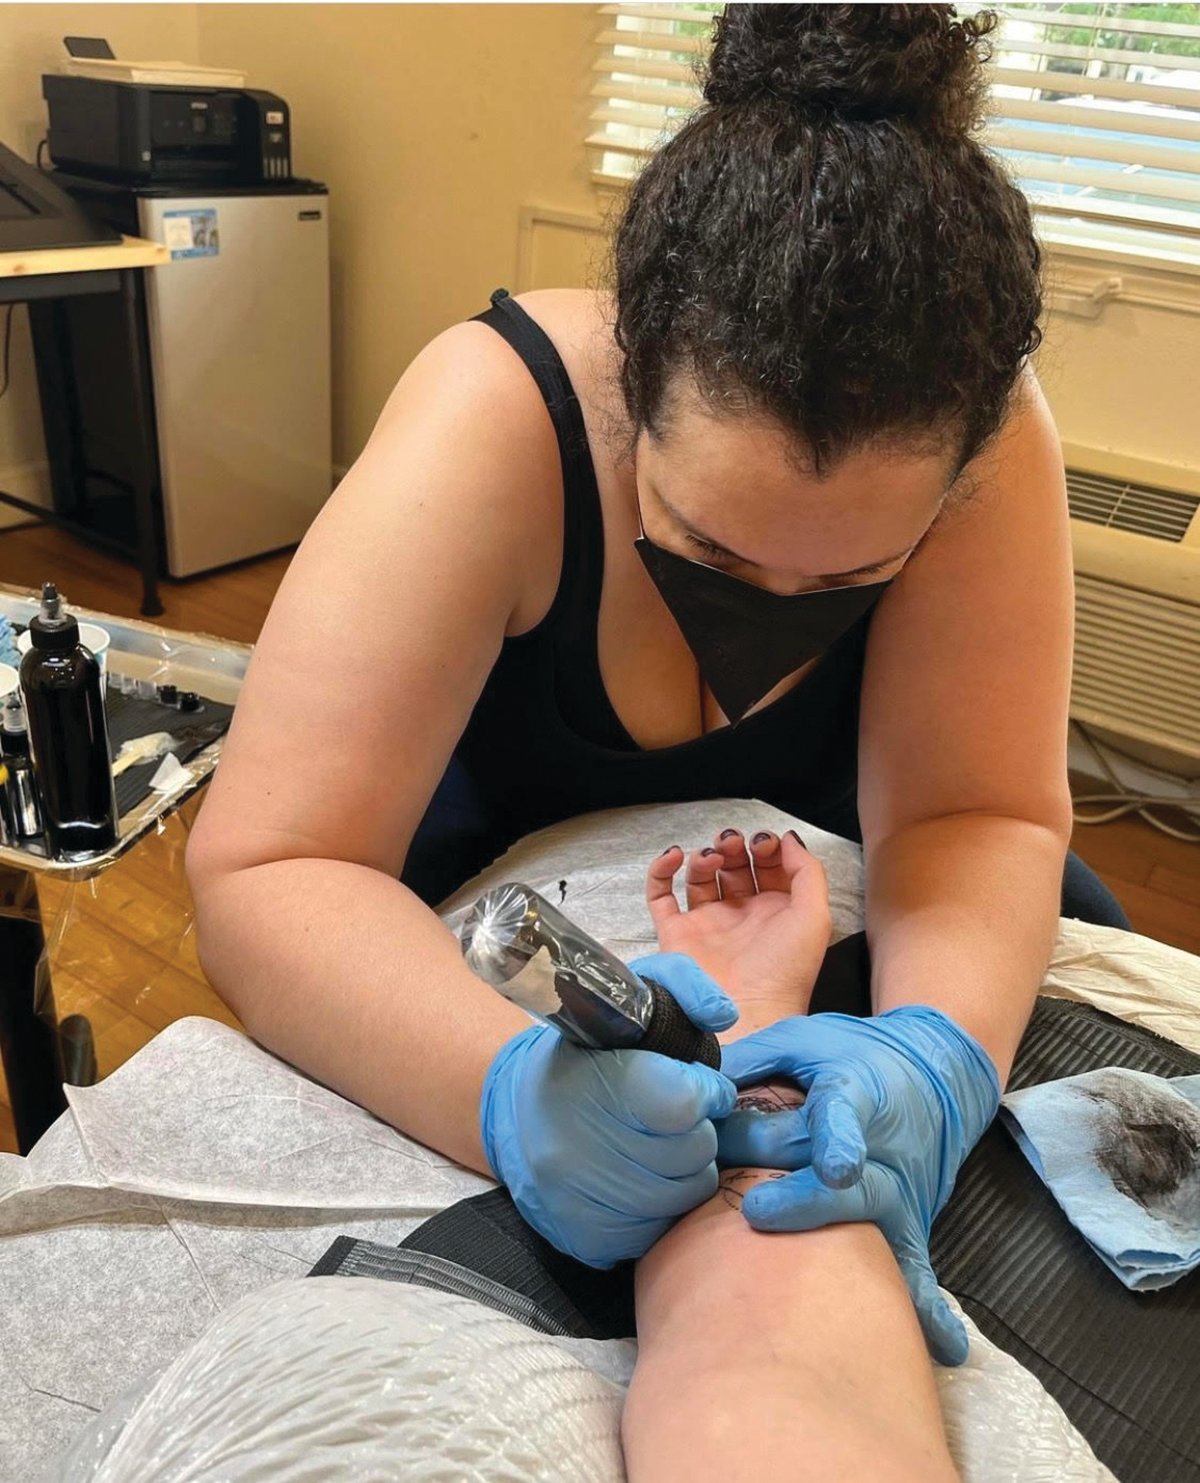 Chelsea Stowers tattoos a client at her studio in Ridgefield.